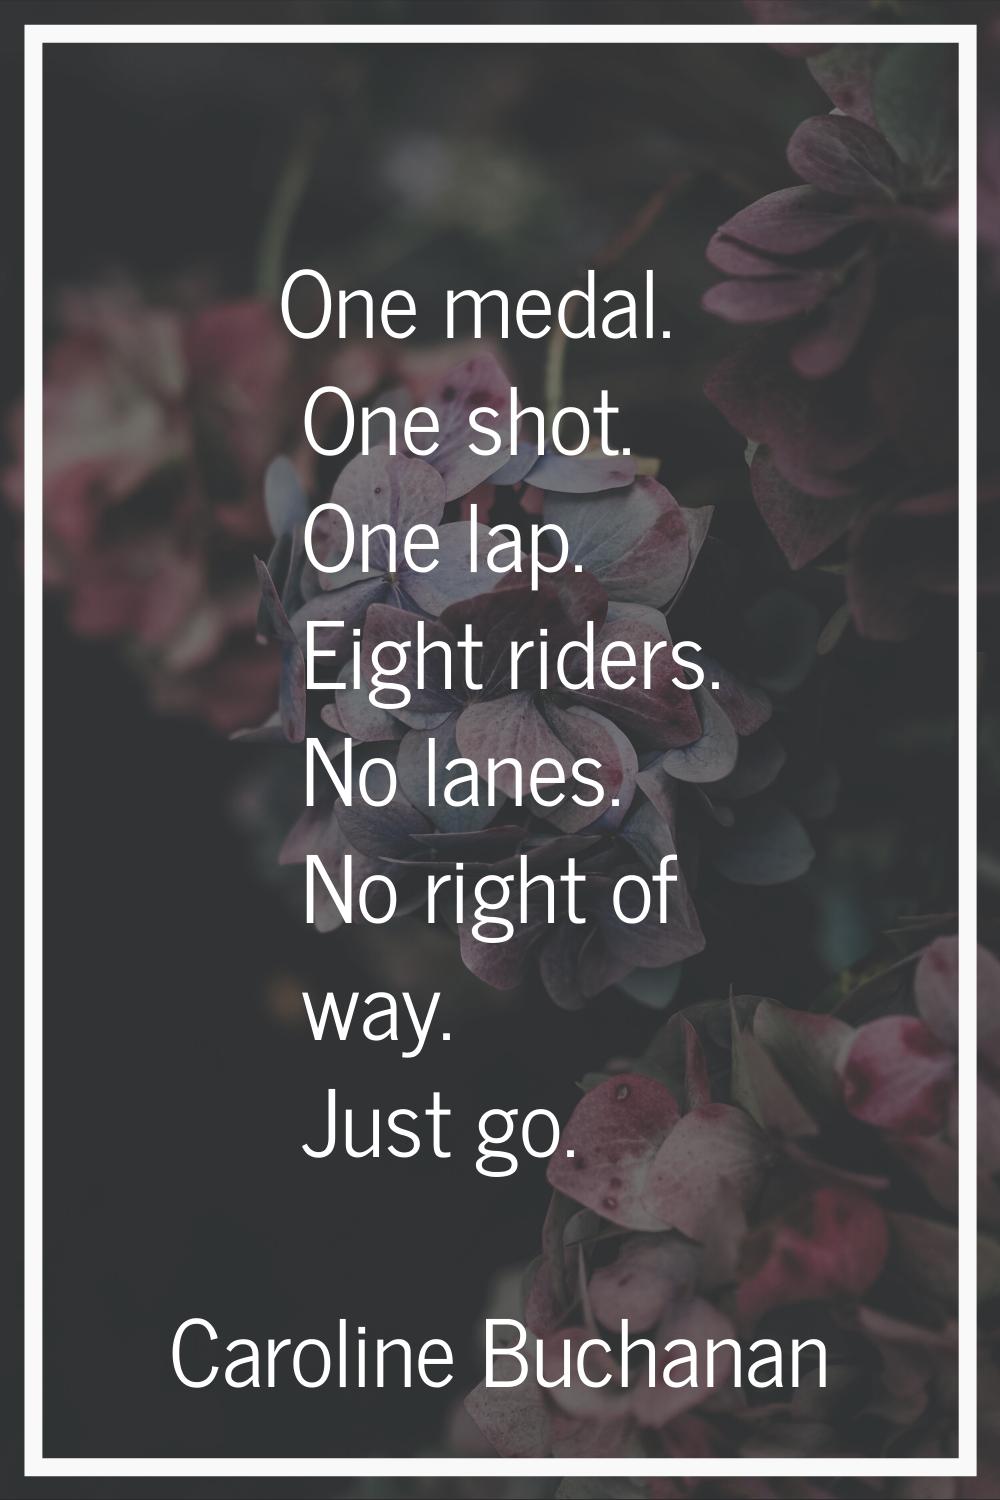 One medal. One shot. One lap. Eight riders. No lanes. No right of way. Just go.